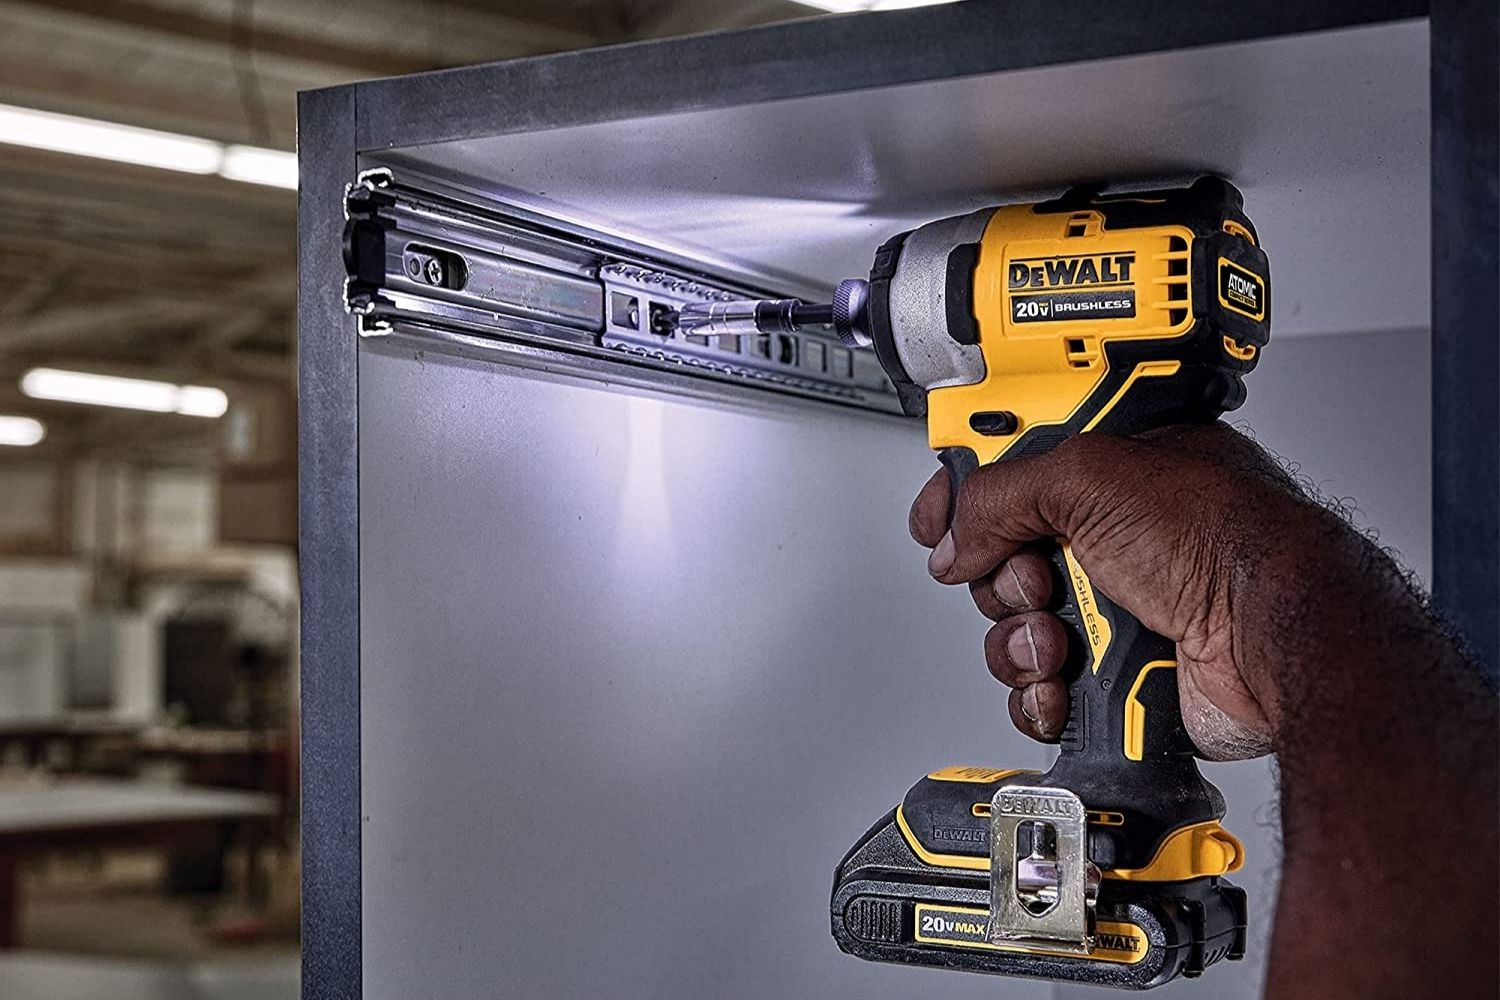 A person using the best DeWalt impact driver to install drawer tracks in a cabinet.